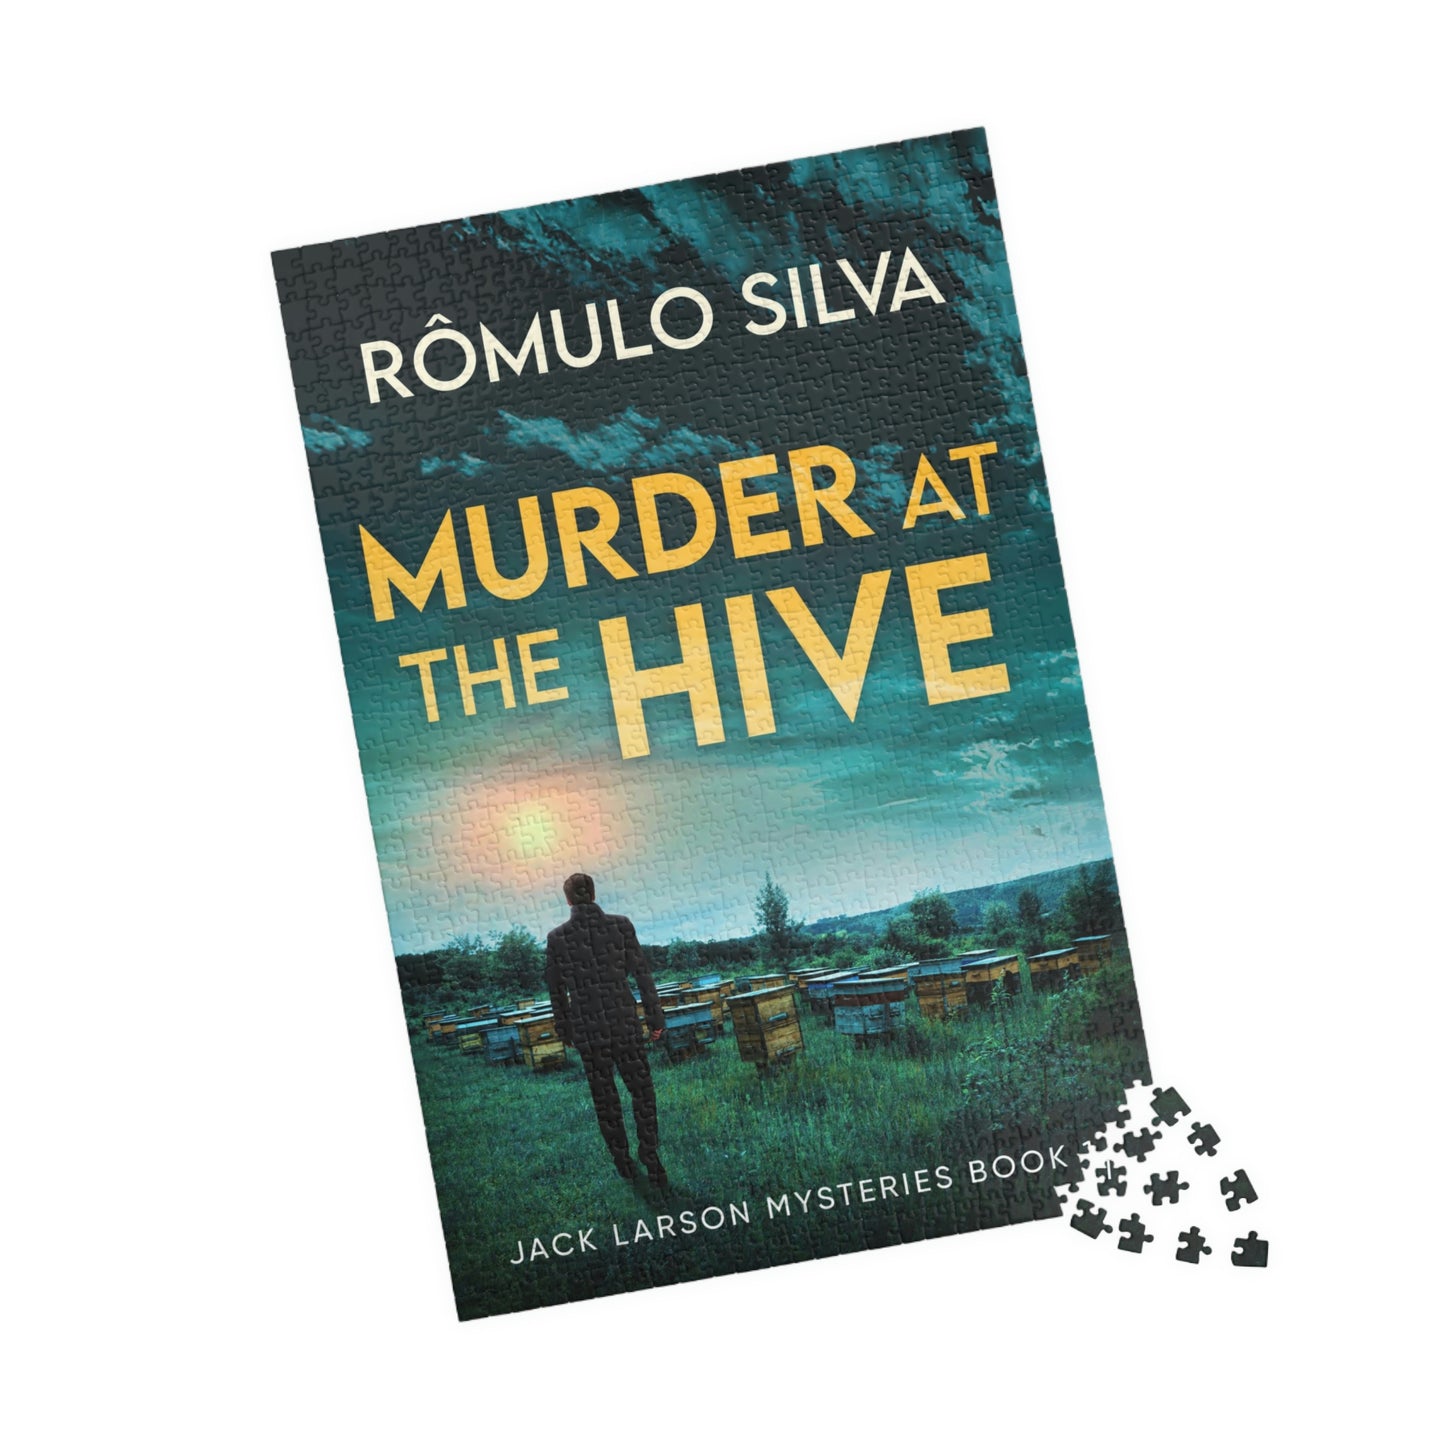 Murder at The Hive - 1000 Piece Jigsaw Puzzle